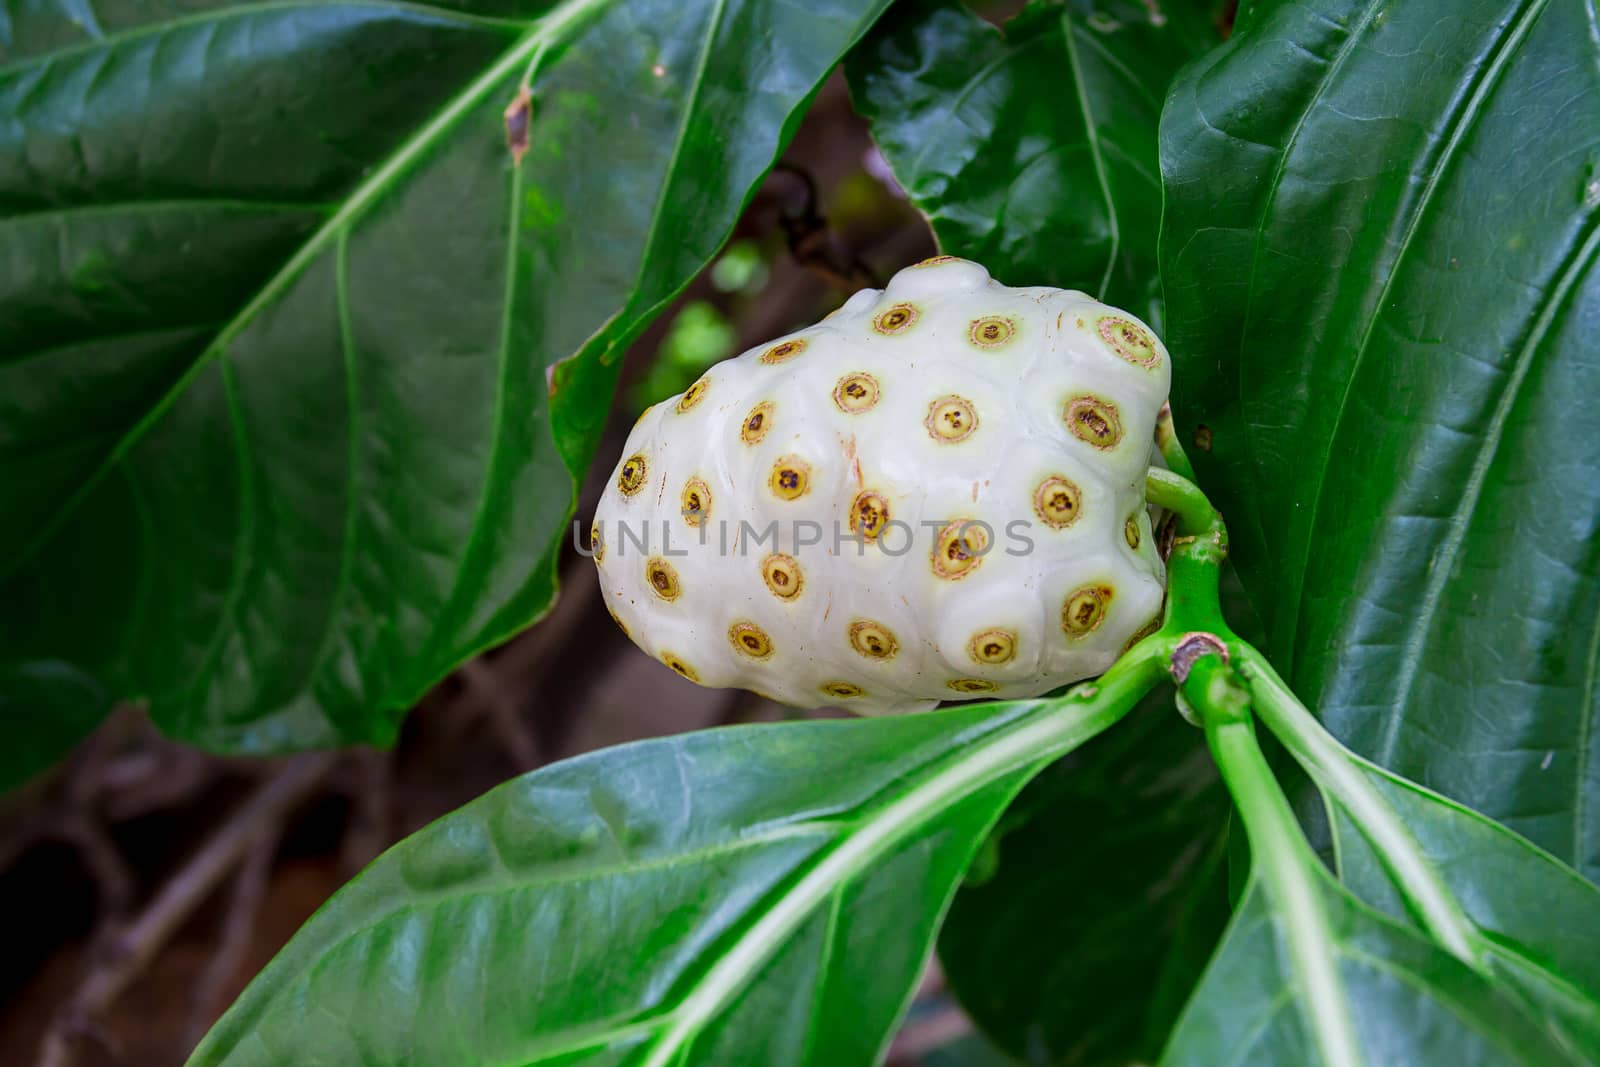 White fruit on a branch in a tropical climat